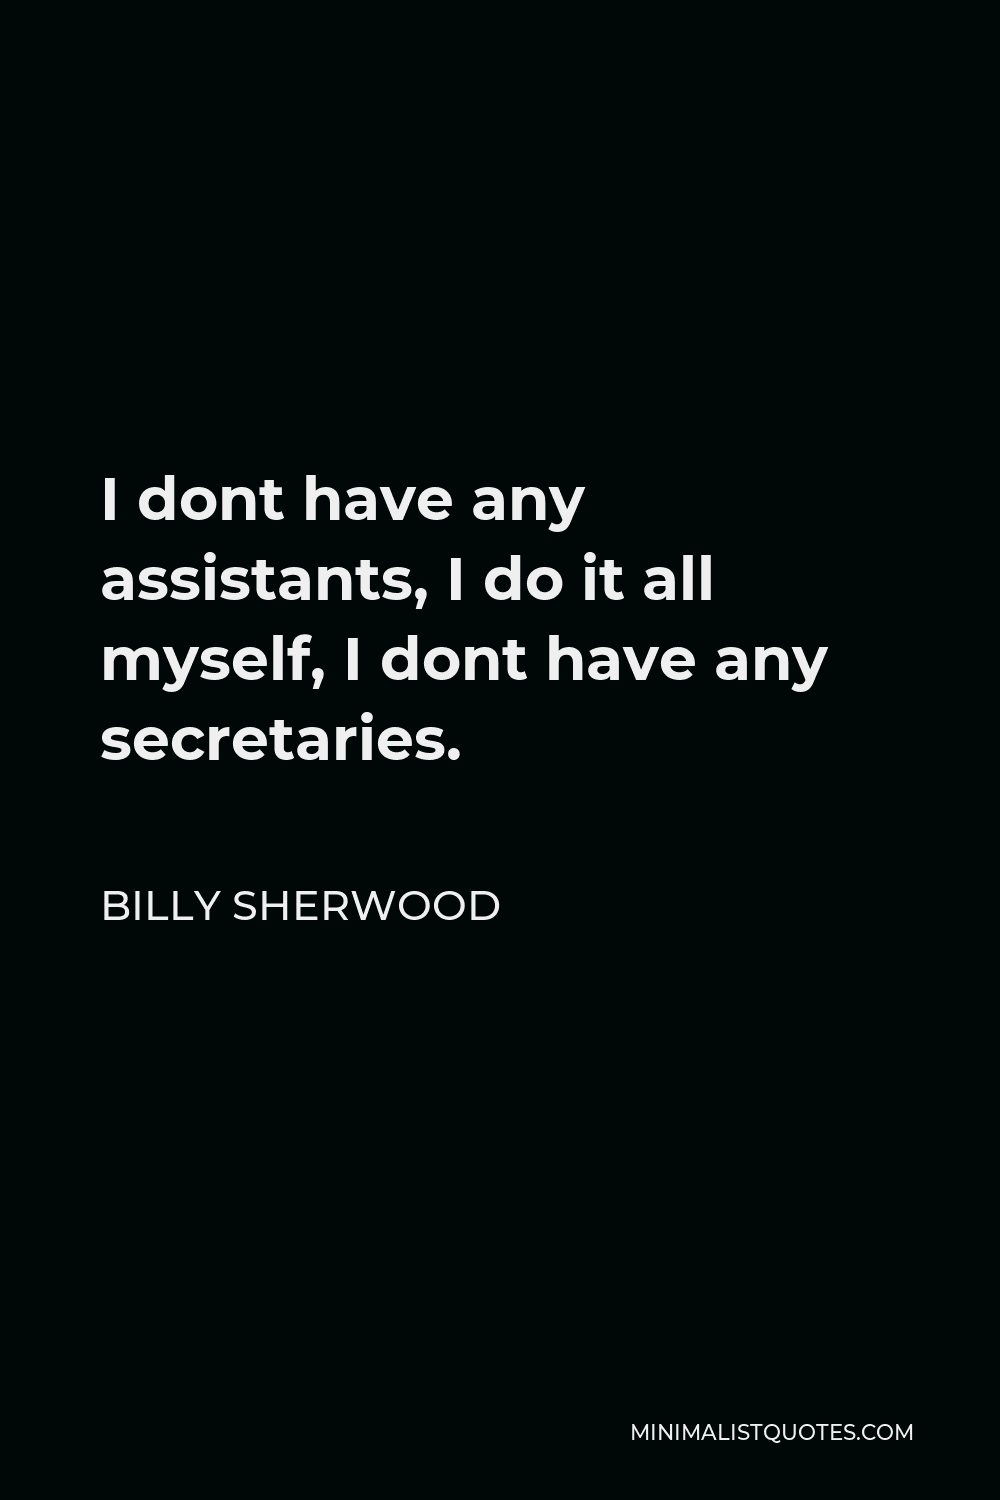 Billy Sherwood Quote: I dont have any assistants, I do it all myself, I ...